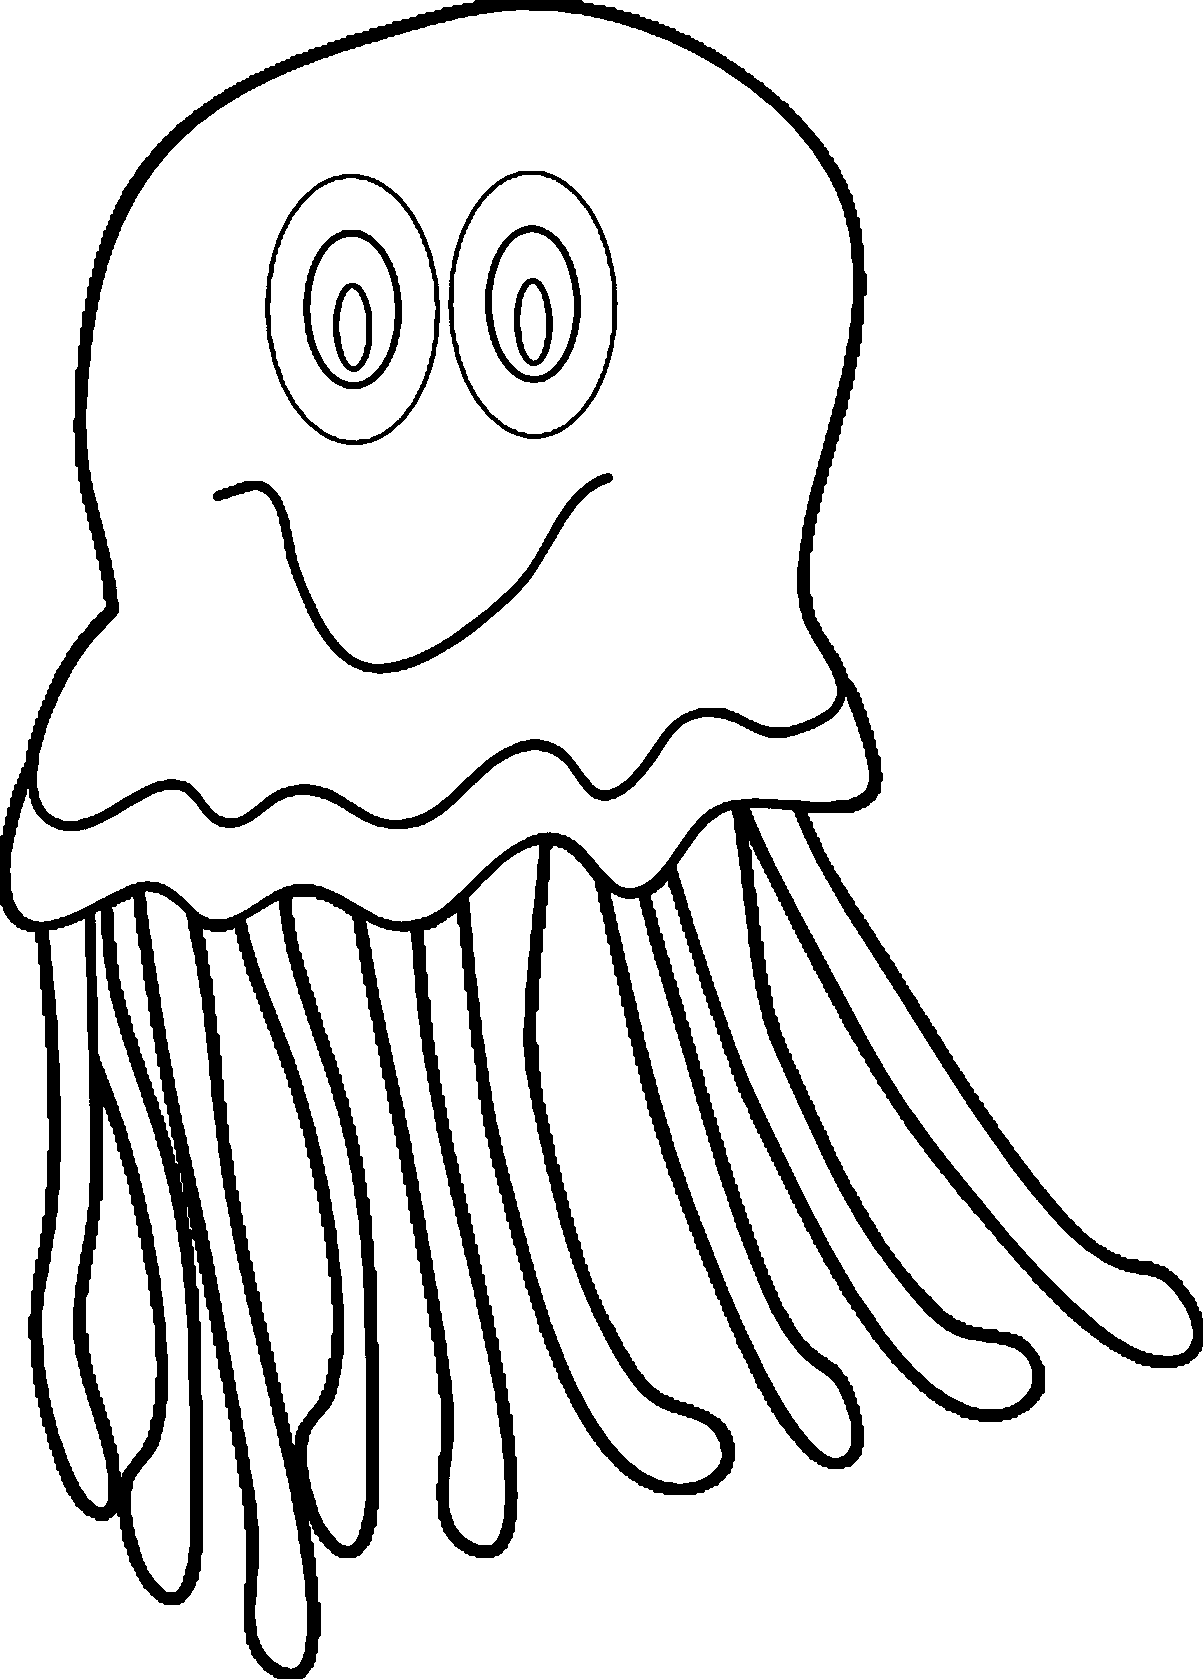 jellyfish-outline-free-download-on-clipartmag